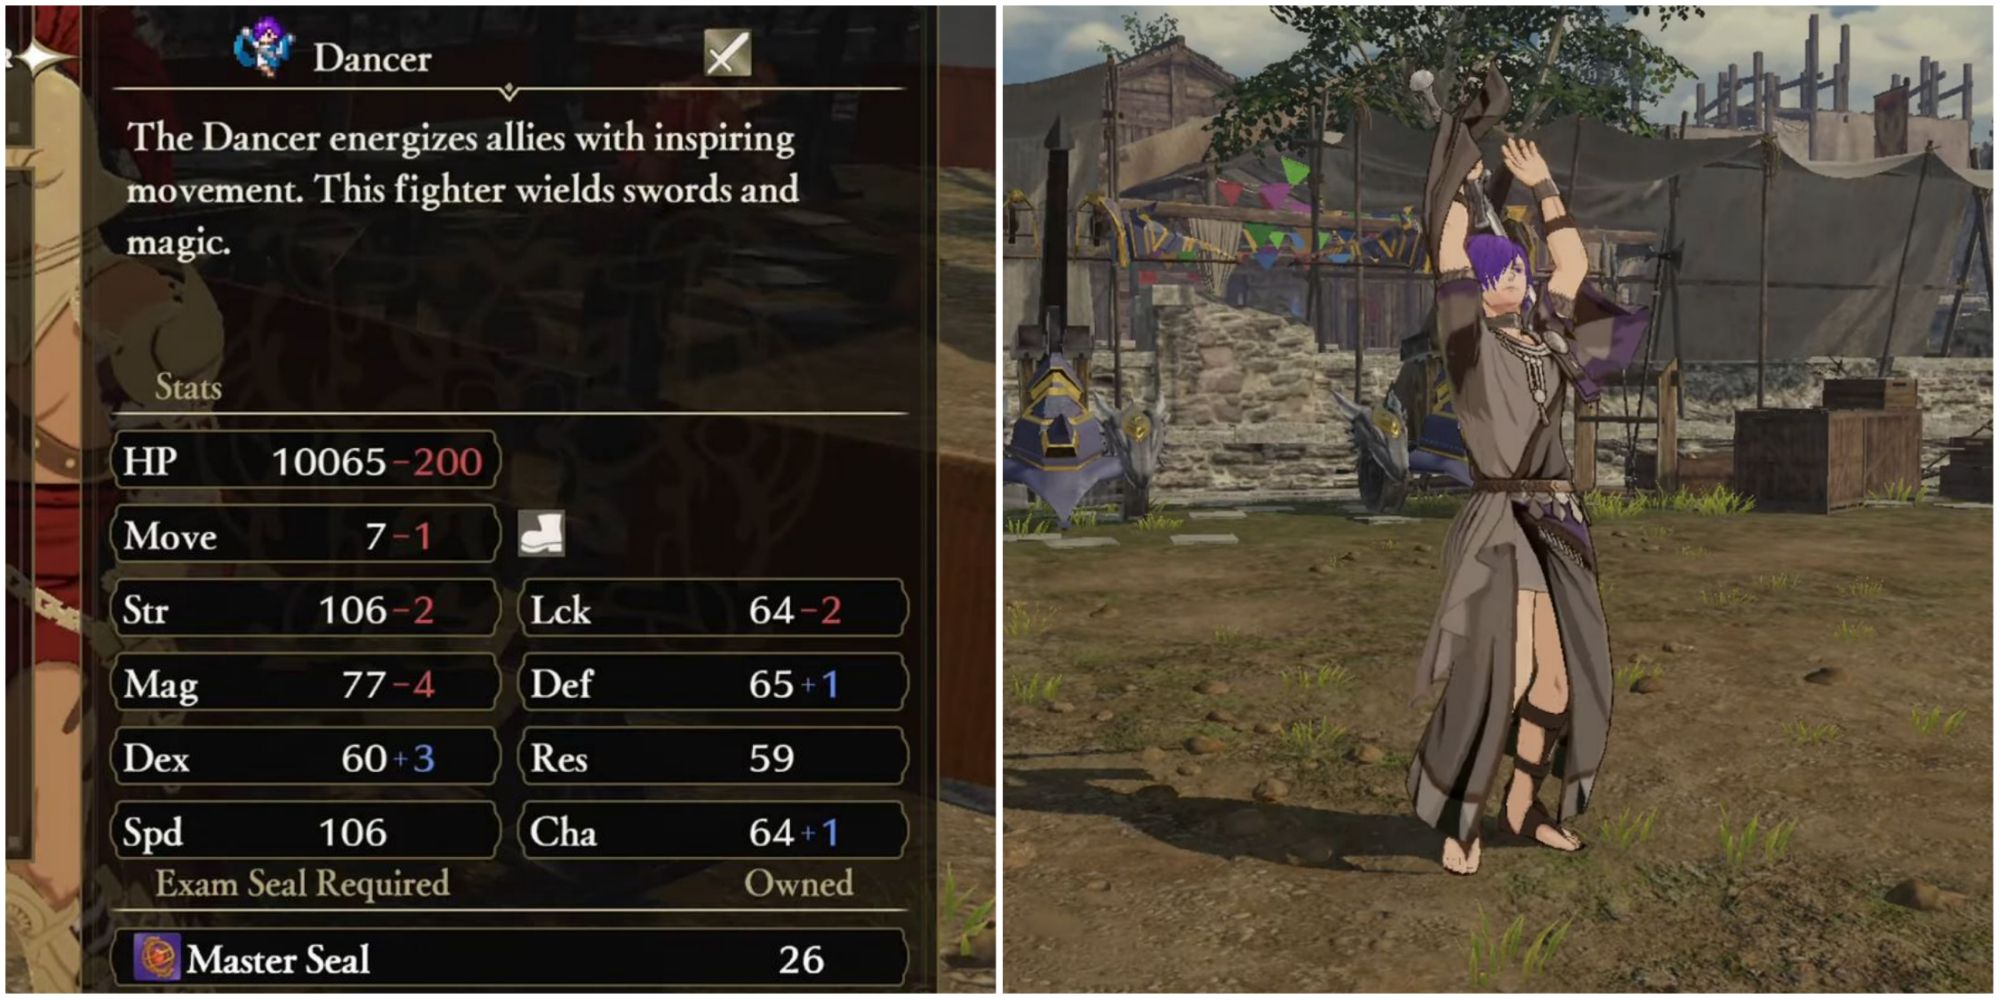 A split image of Dancer stat screen and Shez in dancer outfit